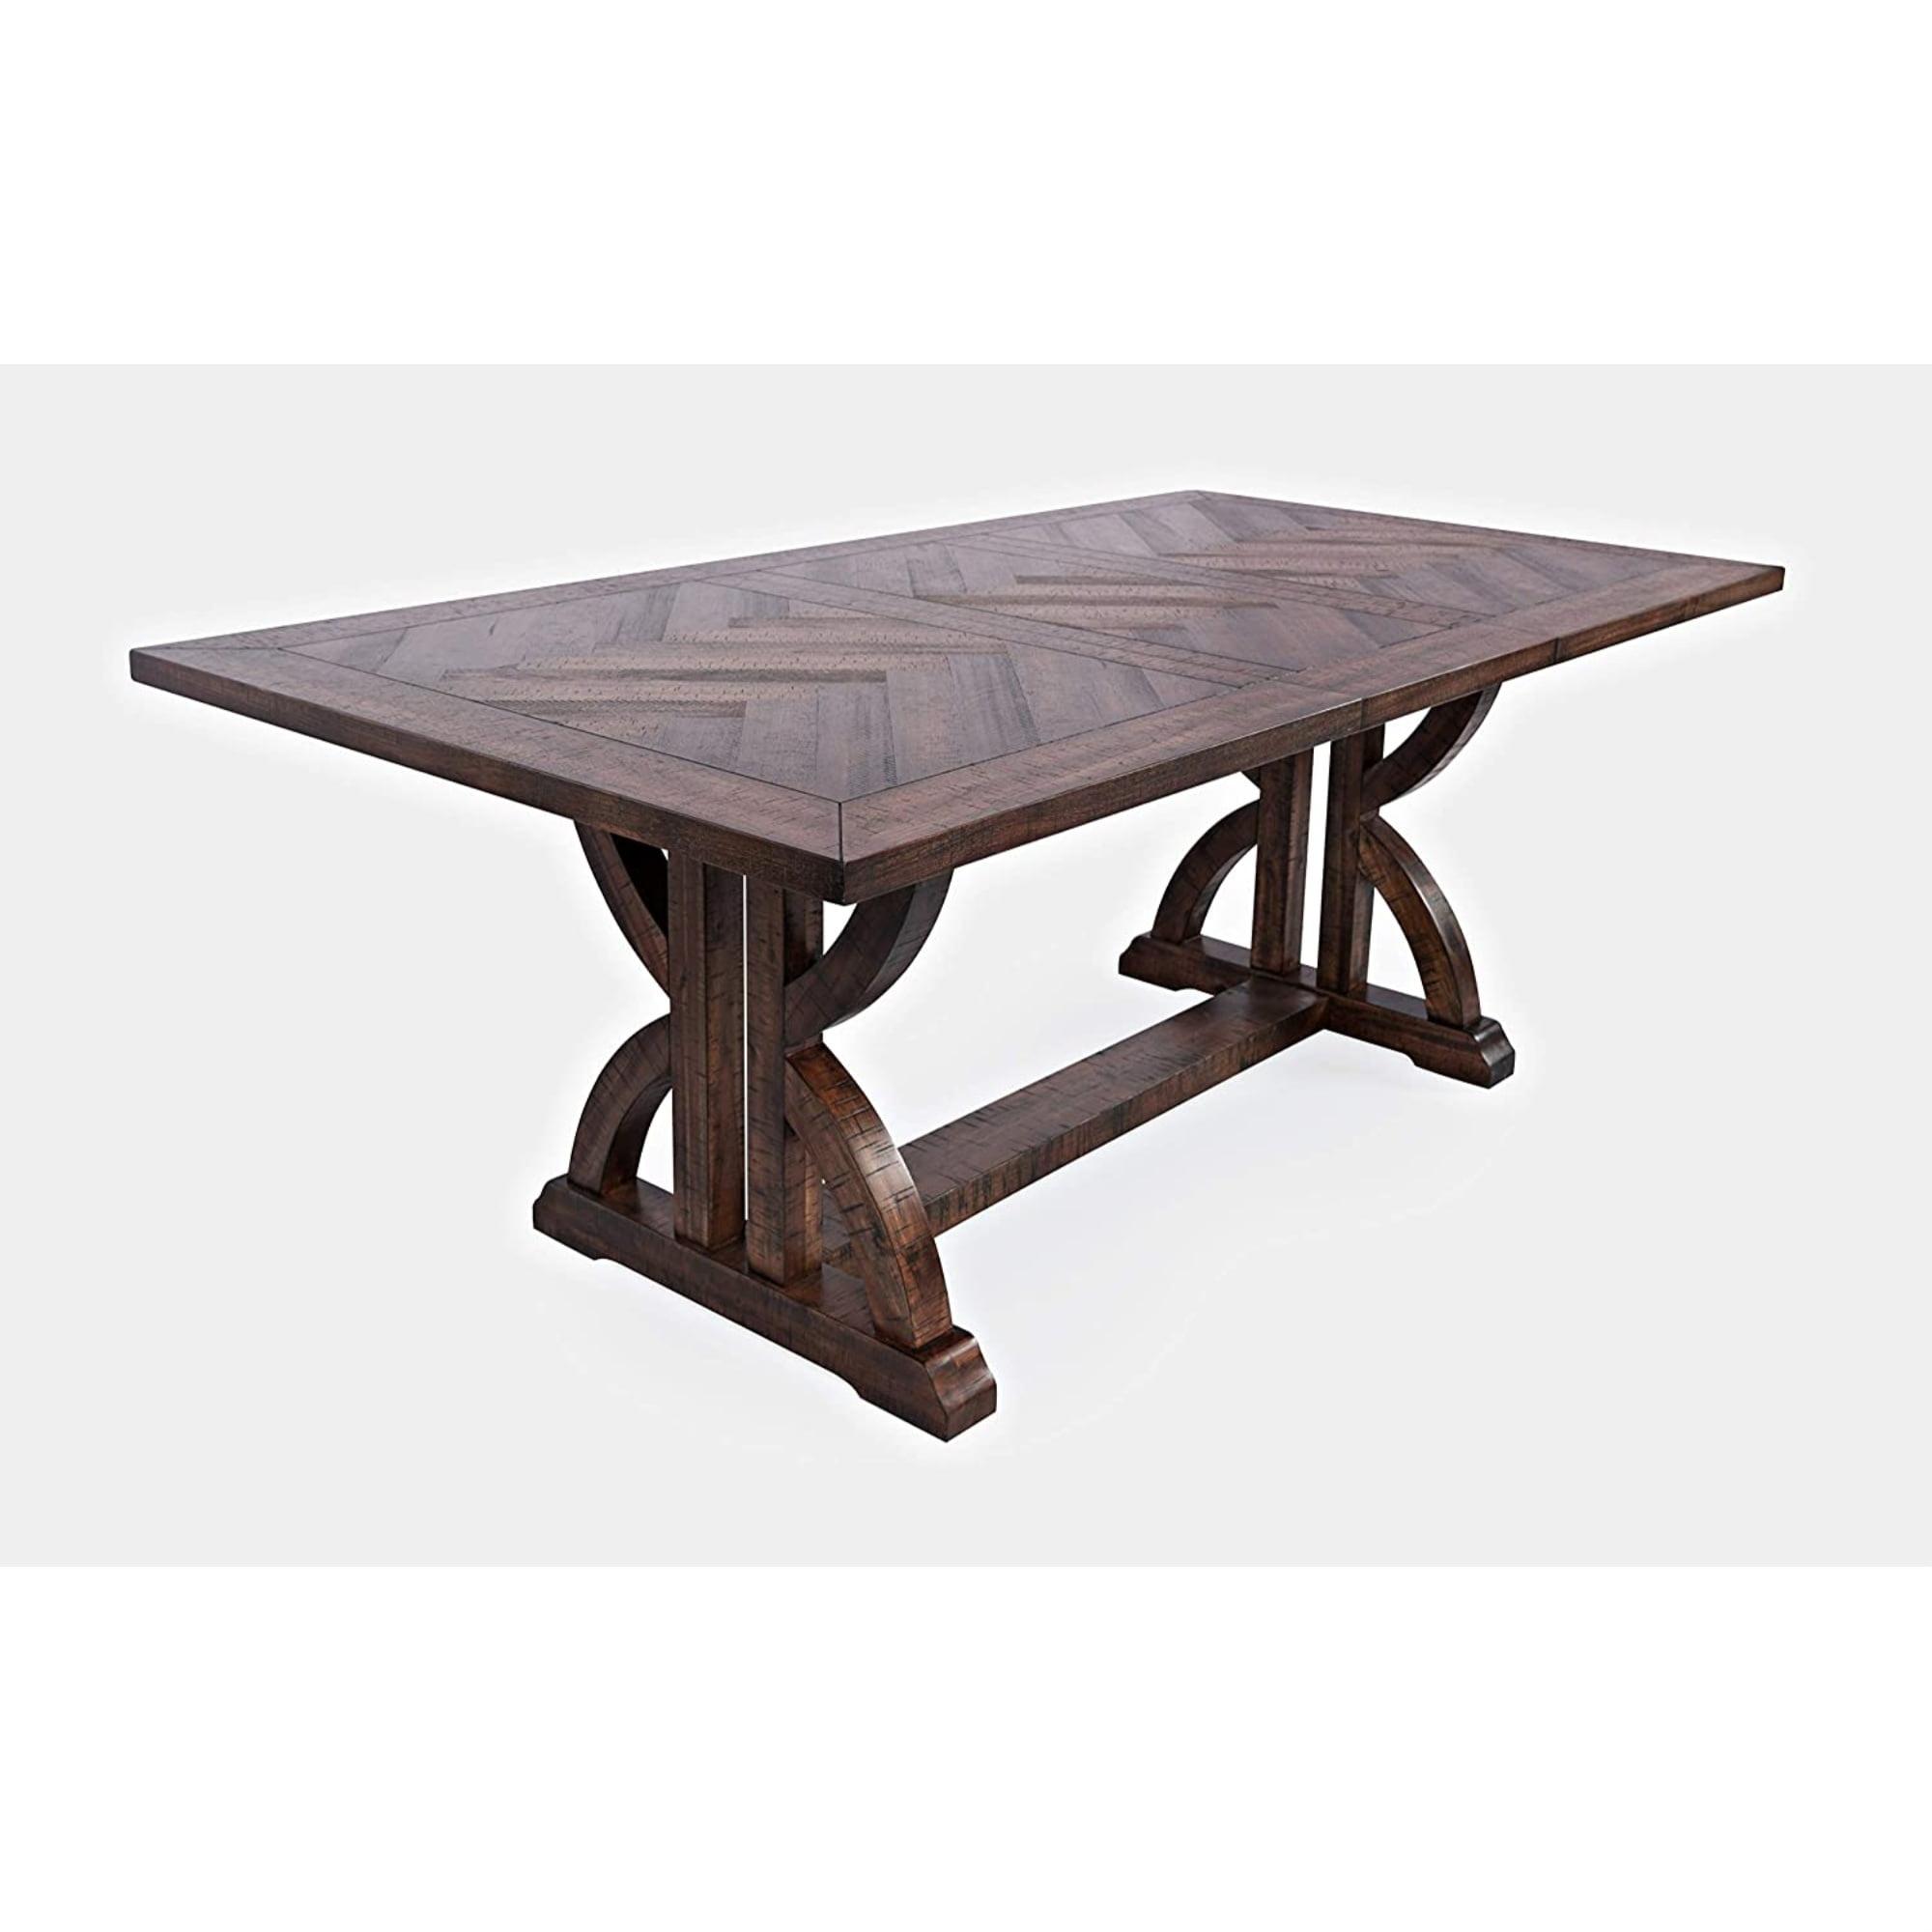 Fairview 78'' Distressed Acacia Chevron Extendable Dining Table